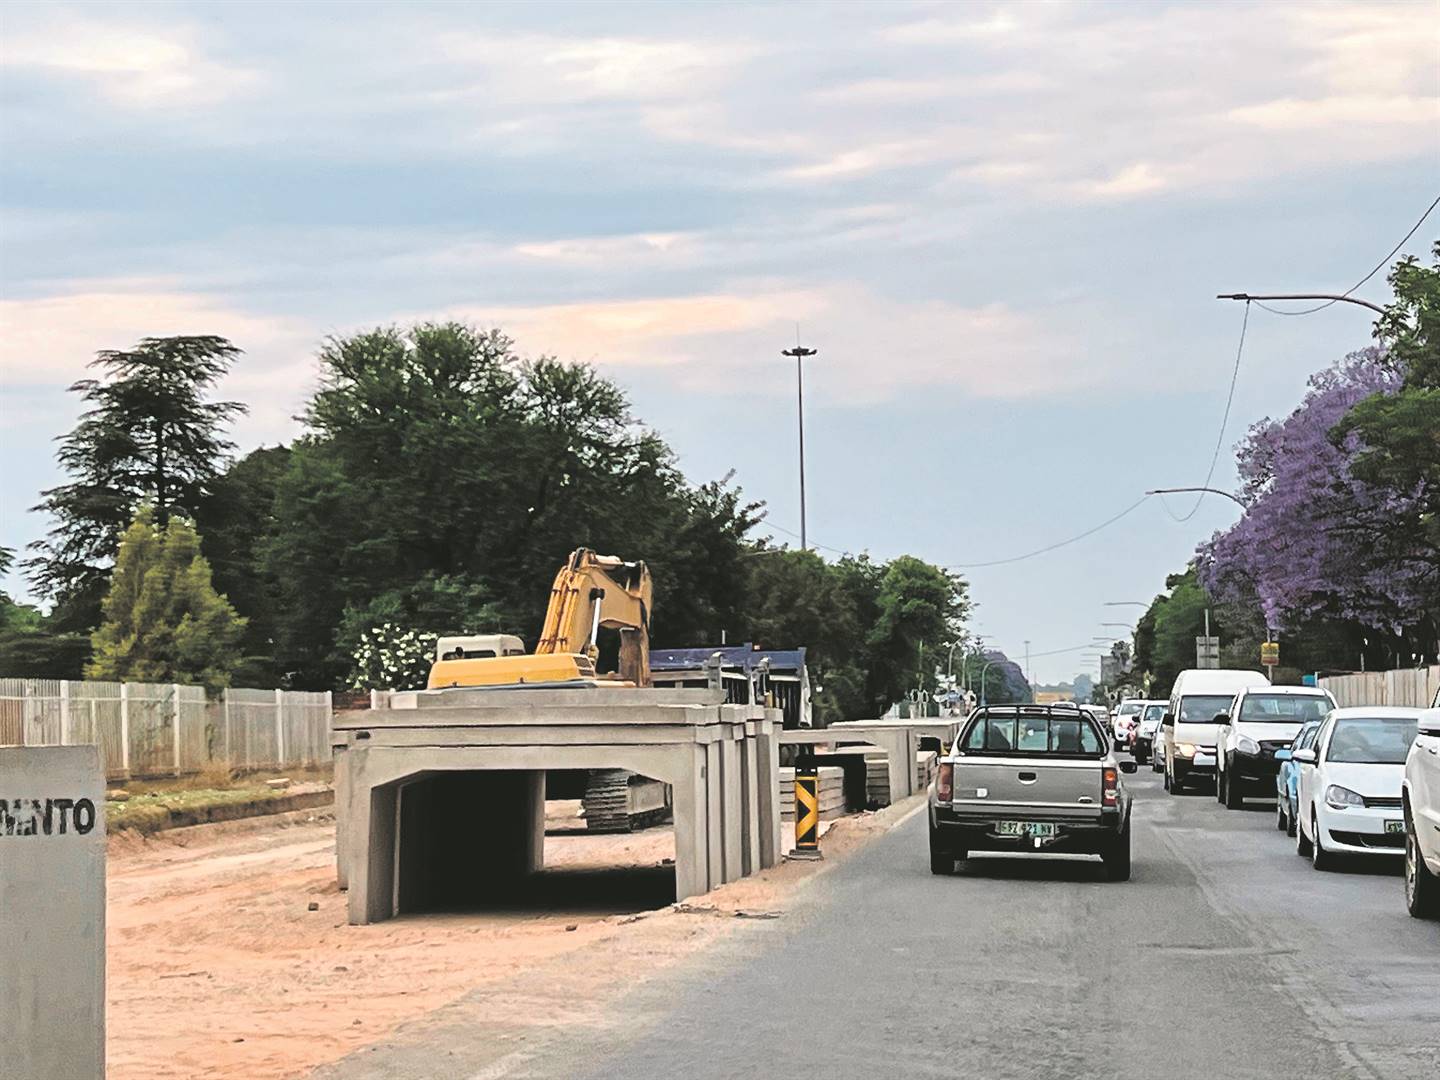 The decision of the North West department of public works and roads to award a R47 million tender for the refurbishment and maintenance of Nelson Mandela Drive in Mahikeng has turned into a nightmare 